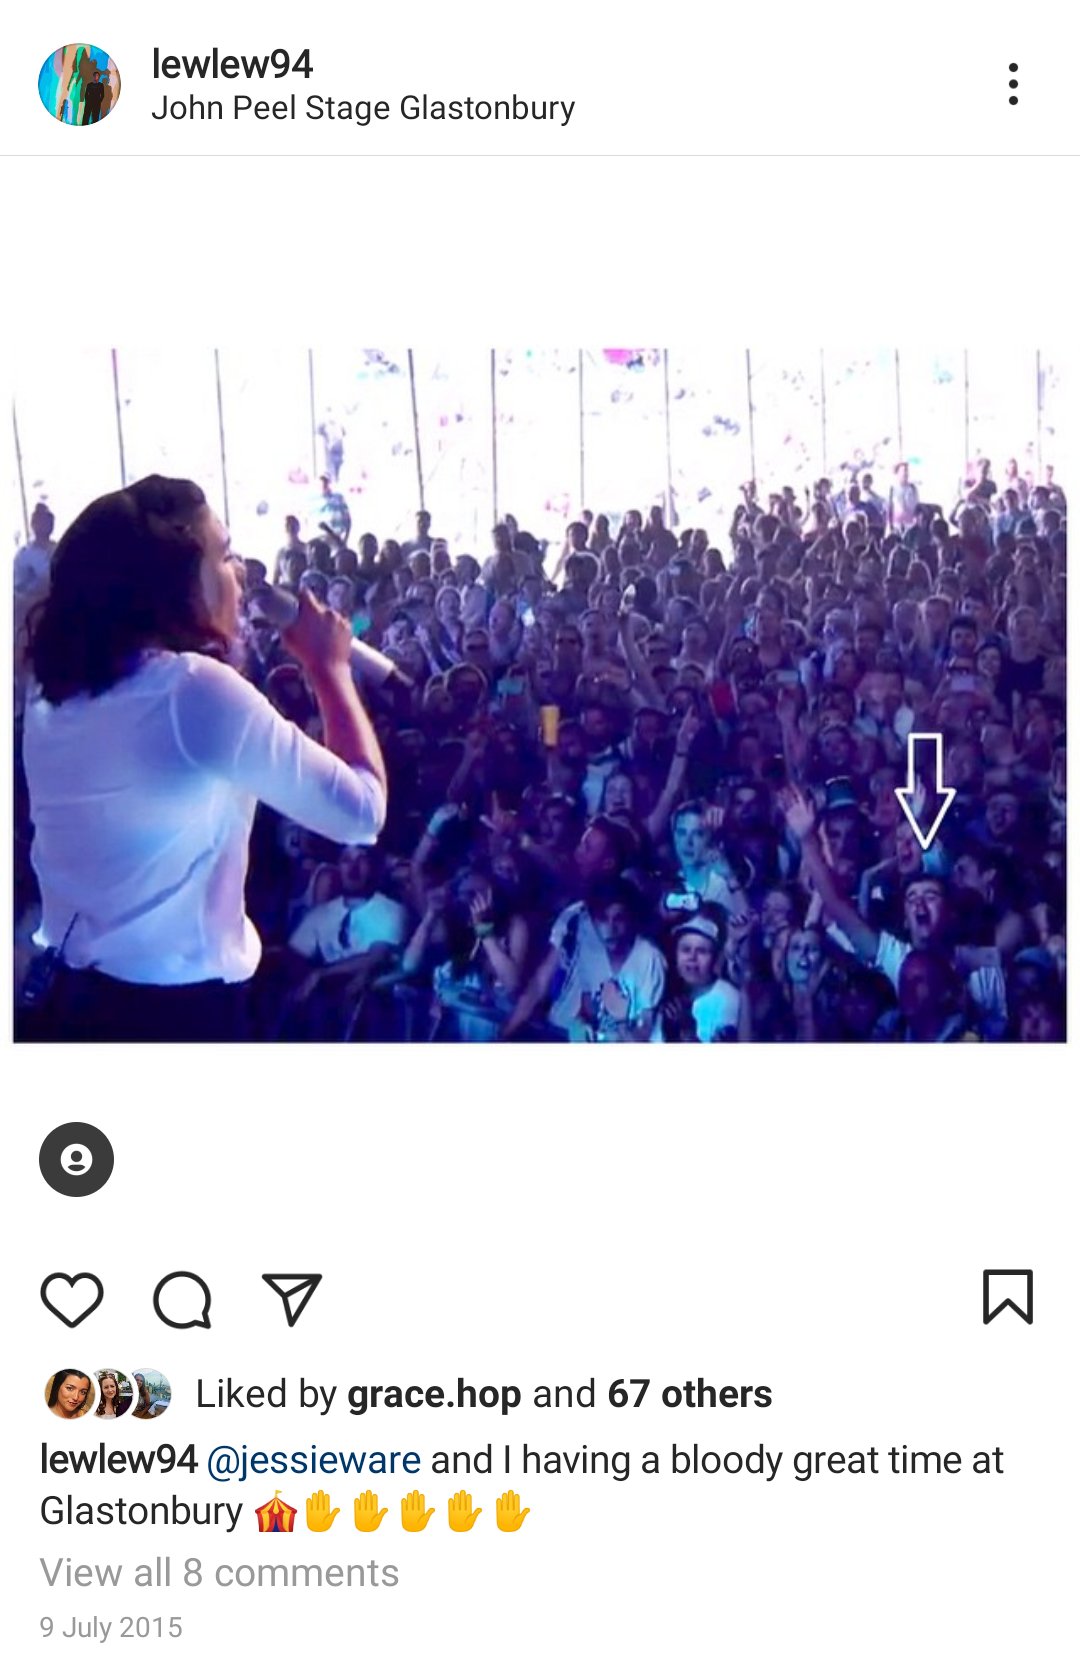 Jessie Ware on Twitter: "As part of the #GlastonburyExperience2021 you can  watch my set from @glastonbury in 2015 now on @bbciplayer. Watch here:  https://t.co/EFvXvGcnQX https://t.co/eJntMex2YL" / Twitter